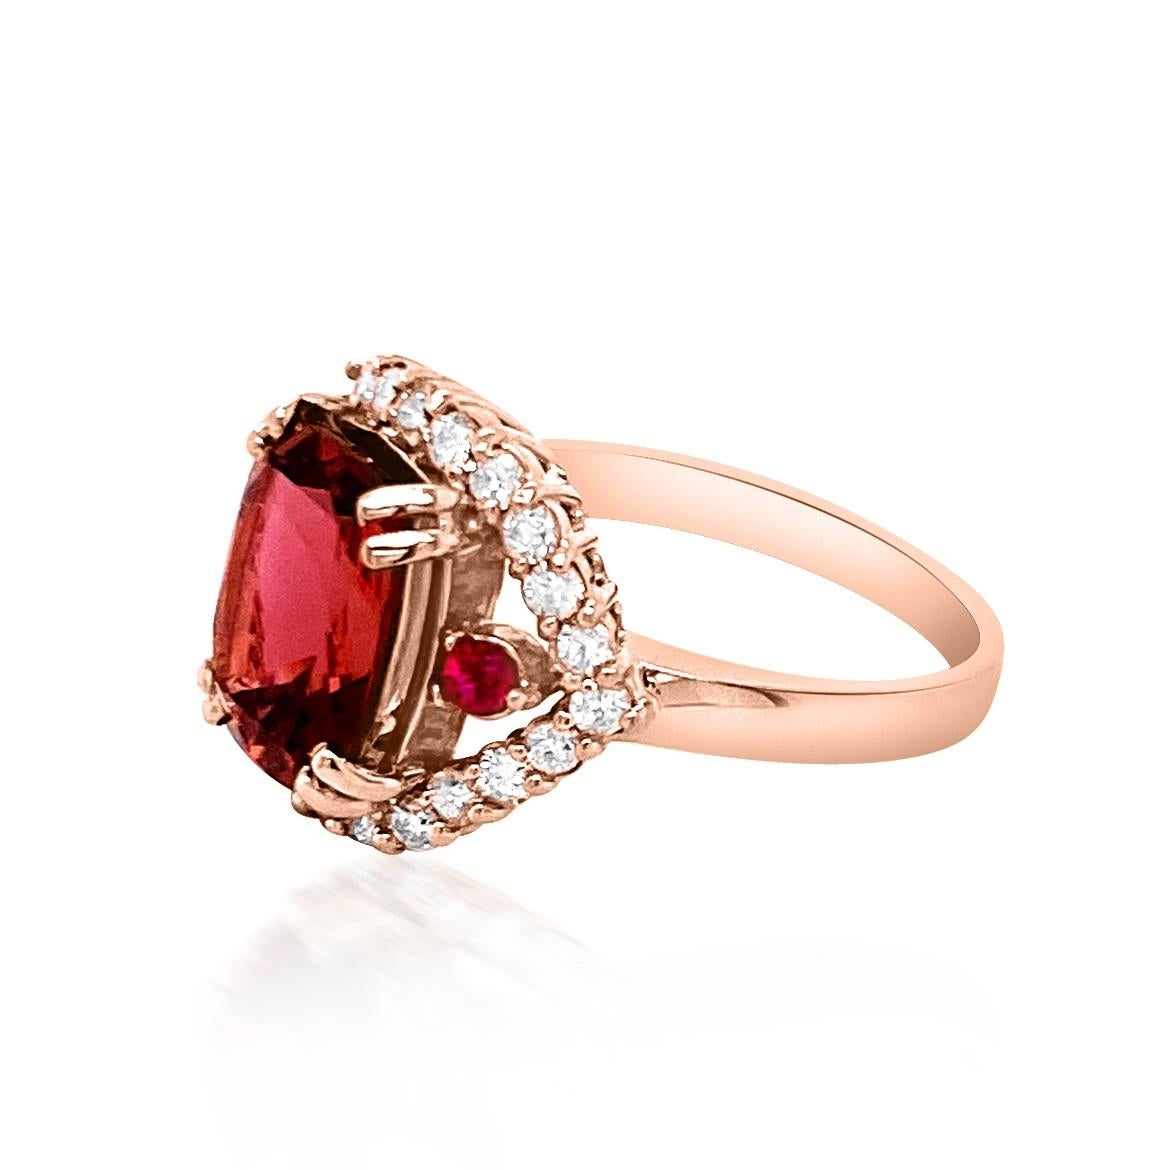 14K ROSE GOLD NATURAL COPPER BEARING PARAIBA TOURMALINE RING:4.68 GRAMS/DIAMOND:0.67CT/RUBY:0.14CT/COPPER BEARING PARAIBA TOURMALINE:4.07CT/#GVR1042 **Pink Tourmaline strengthens one's heart and links it to the heart of the Earth. This striking,